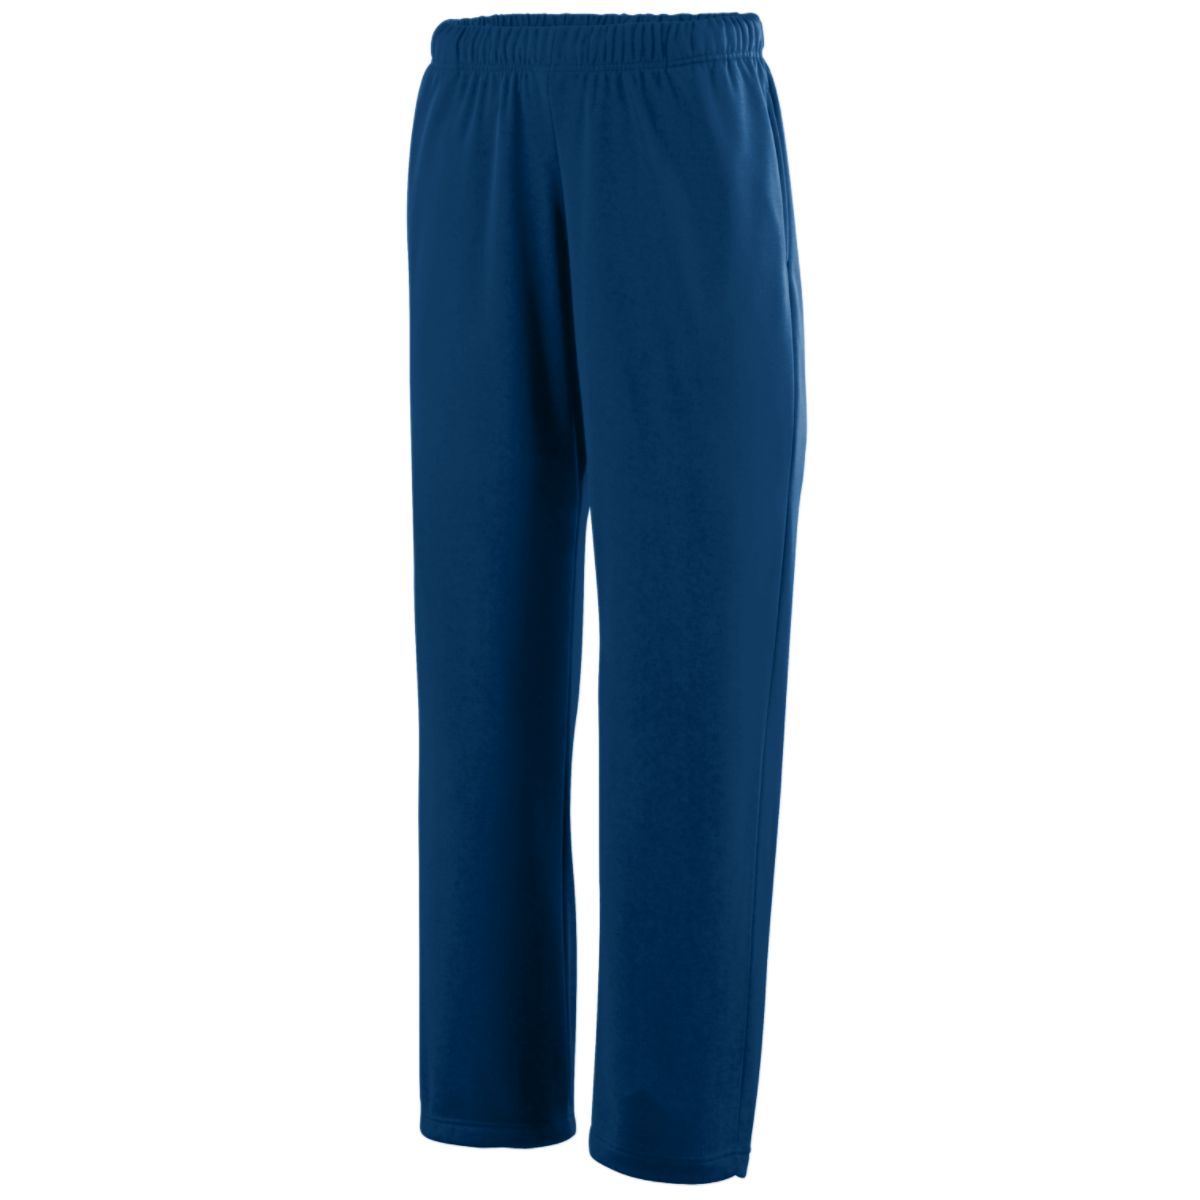 Augusta Sportswear Youth Wicking Fleece Sweatpant in Navy  -Part of the Youth, Youth-Pants, Pants, Augusta-Products product lines at KanaleyCreations.com